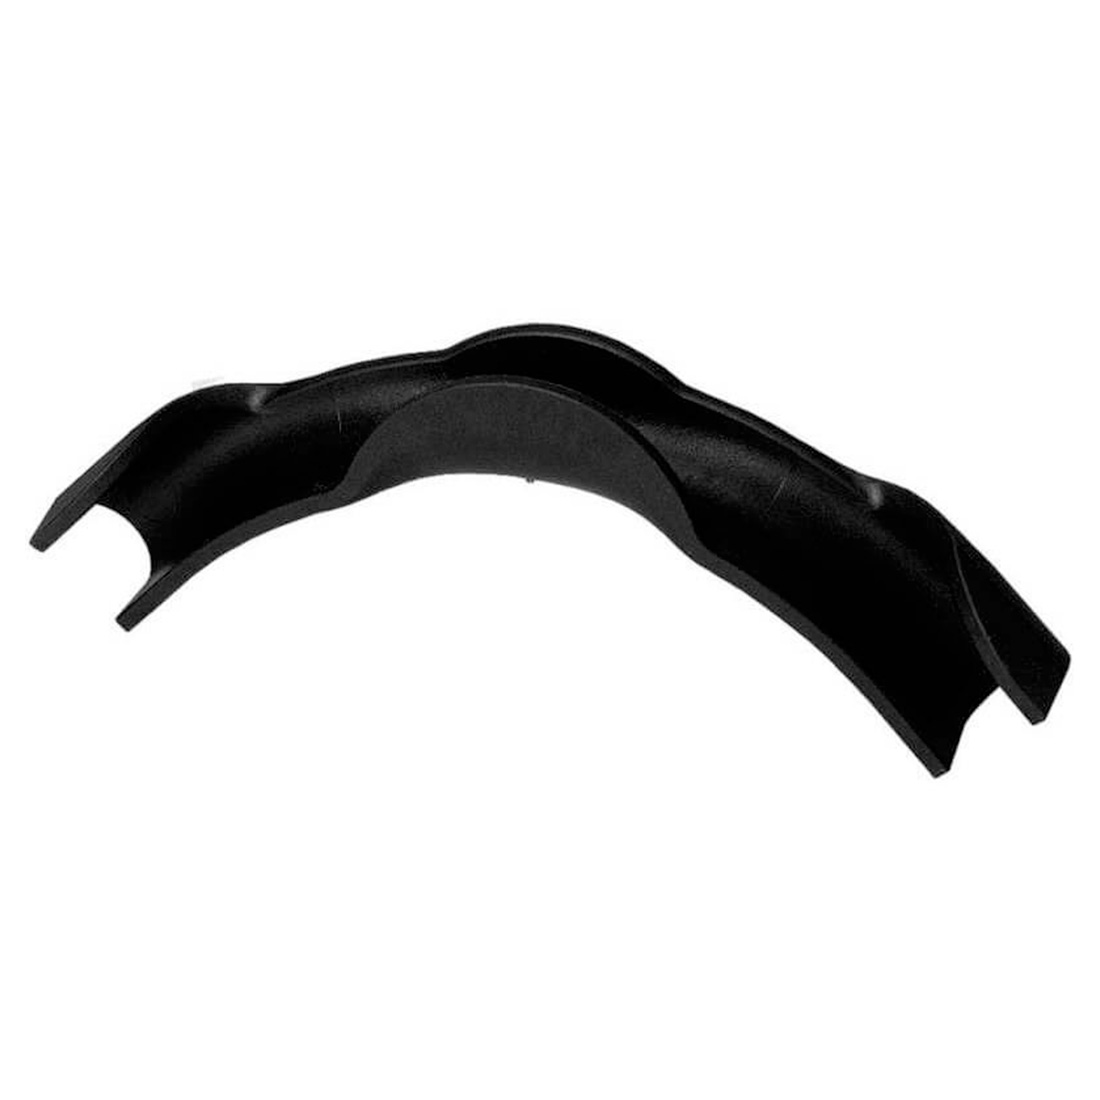 Bend Support 16-18mm